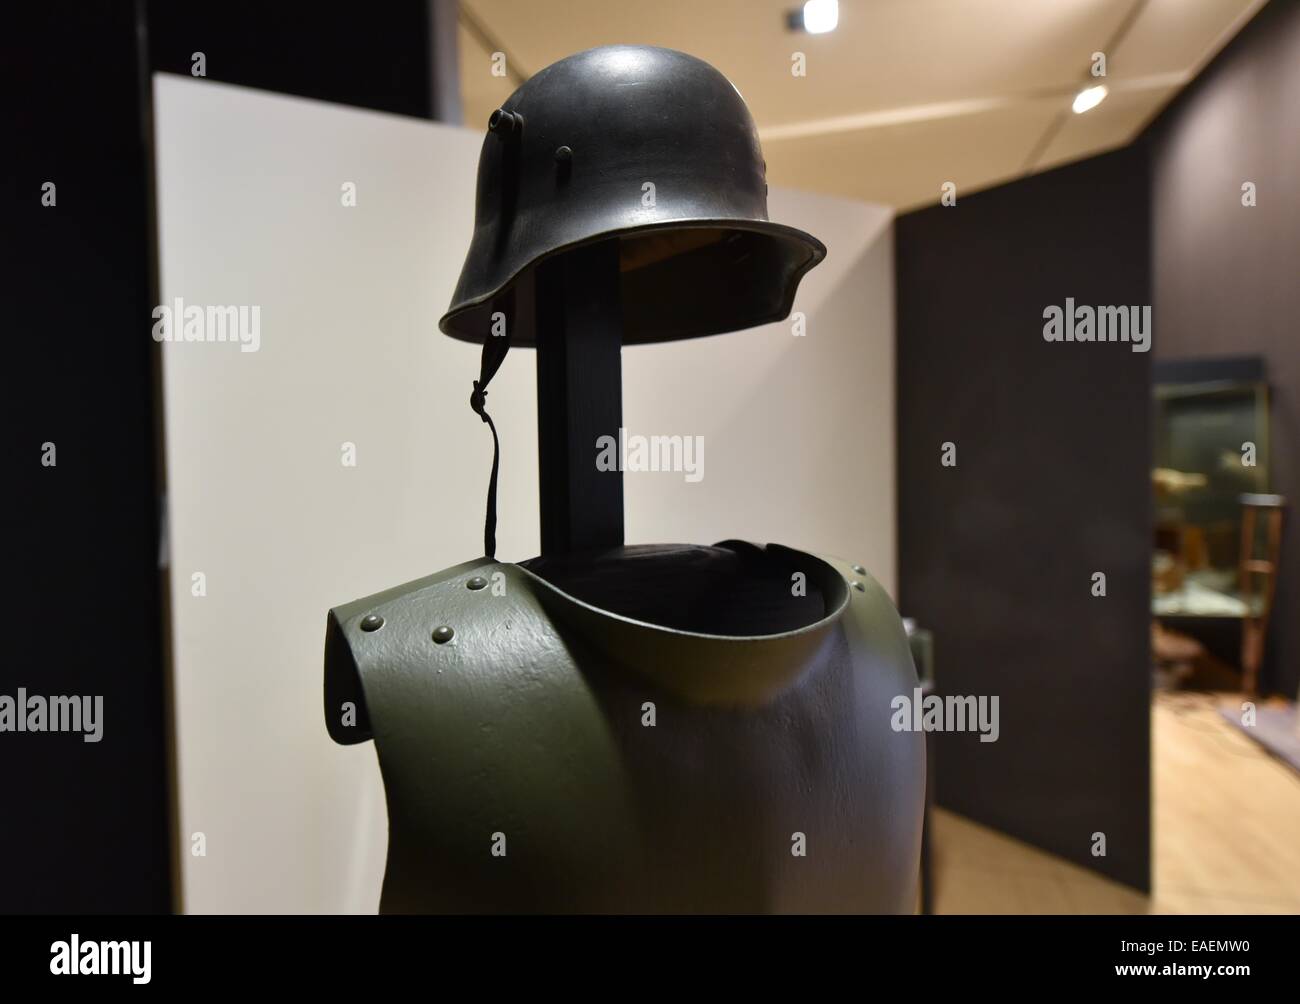 A helmet and armour for trench soldiers from 1918 is on display in the Museum for Sepulchral Culture in Kassel, Germany, 13 November 2014. It is part of the exhibition 'Die Verwandlung. Sterben und Trauer 1914 bis 1918' (Metamorphosis. Death and Mourning 1914 to 1918) which opens on 14 November. Photo: UWE ZUCCHI/dpa Stock Photo